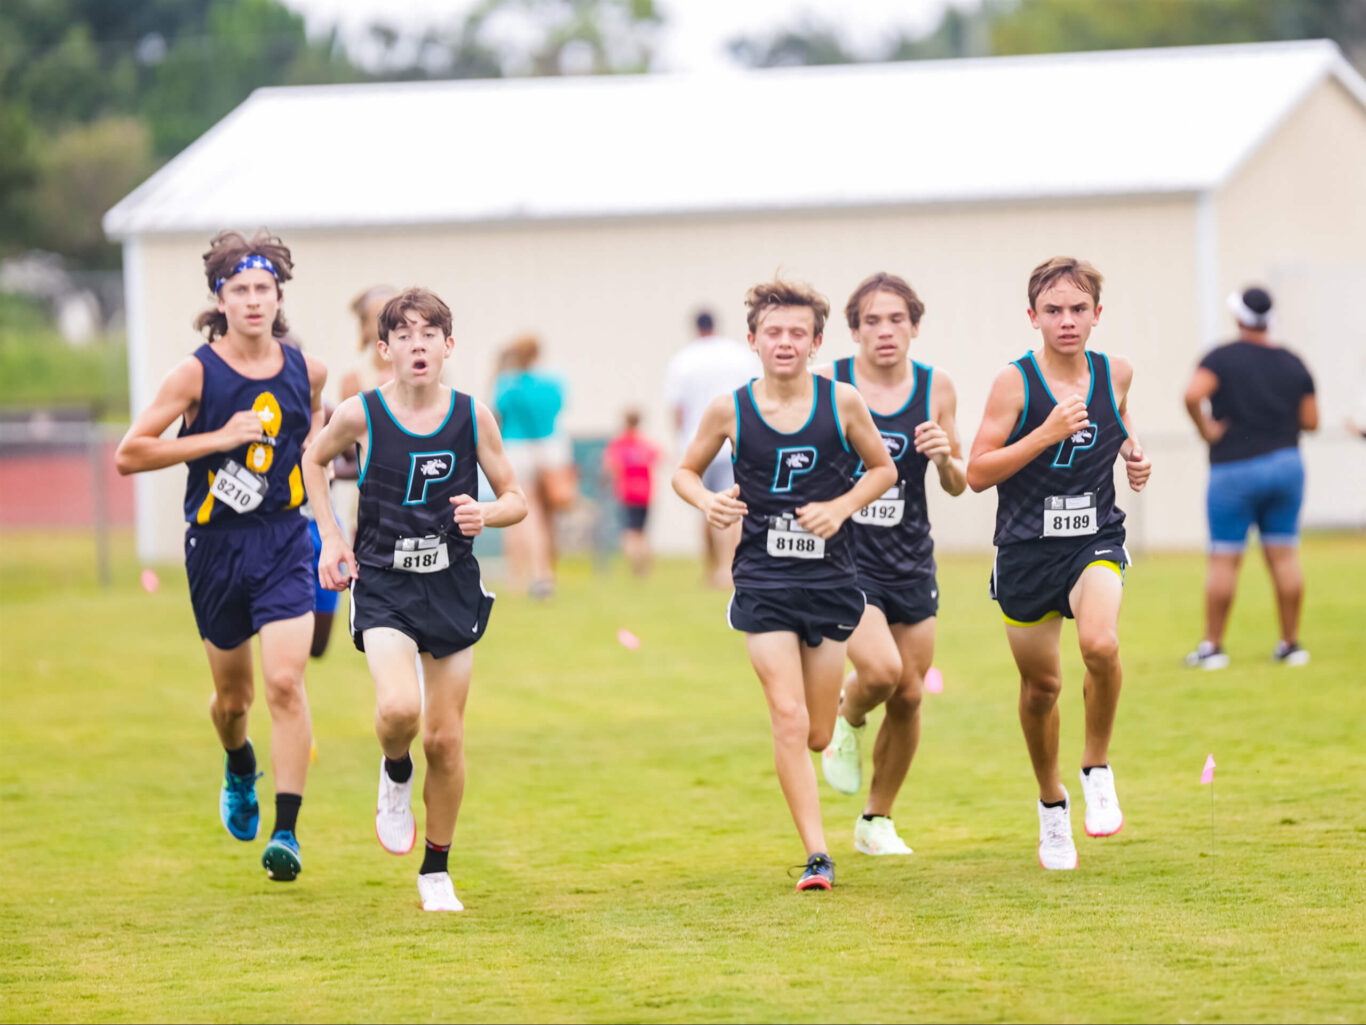 Teams of boys competing in a cross country race.